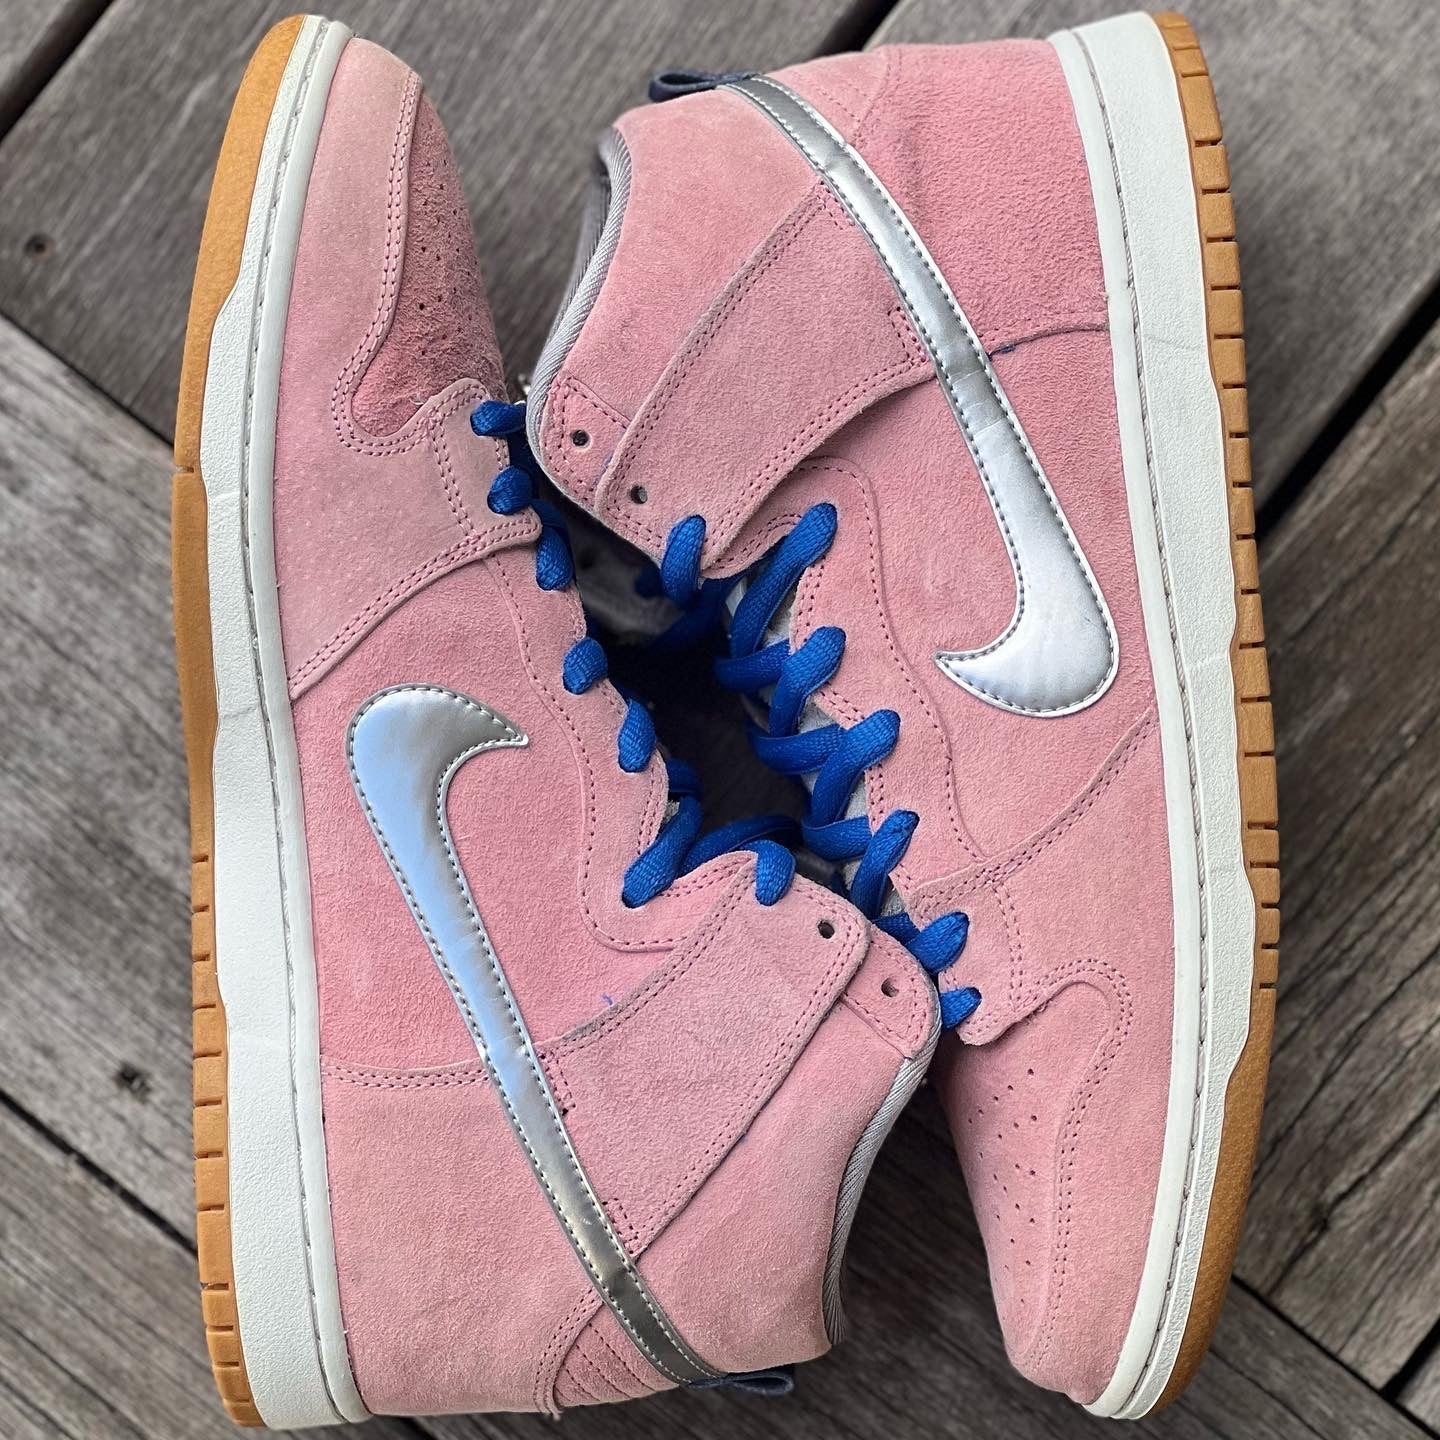 Nike SB Dunk When Pigs Fly Concepts Special Box Size 11.5